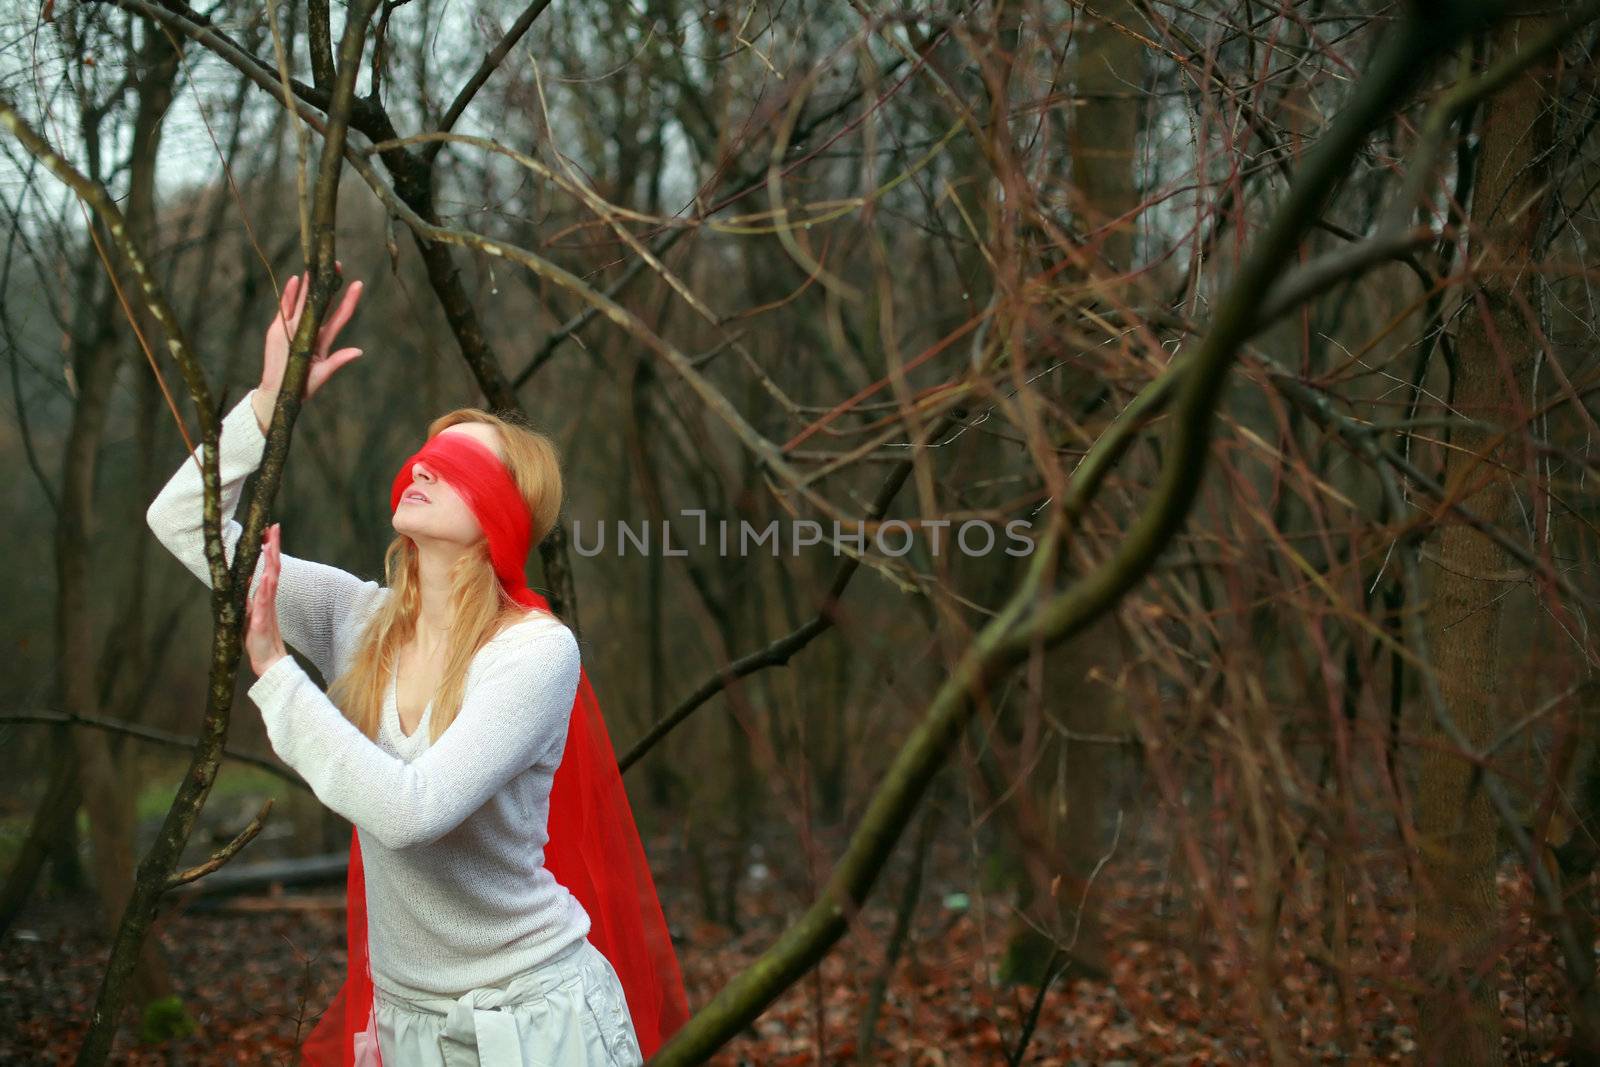 An image of blindfolded woman in dark forest